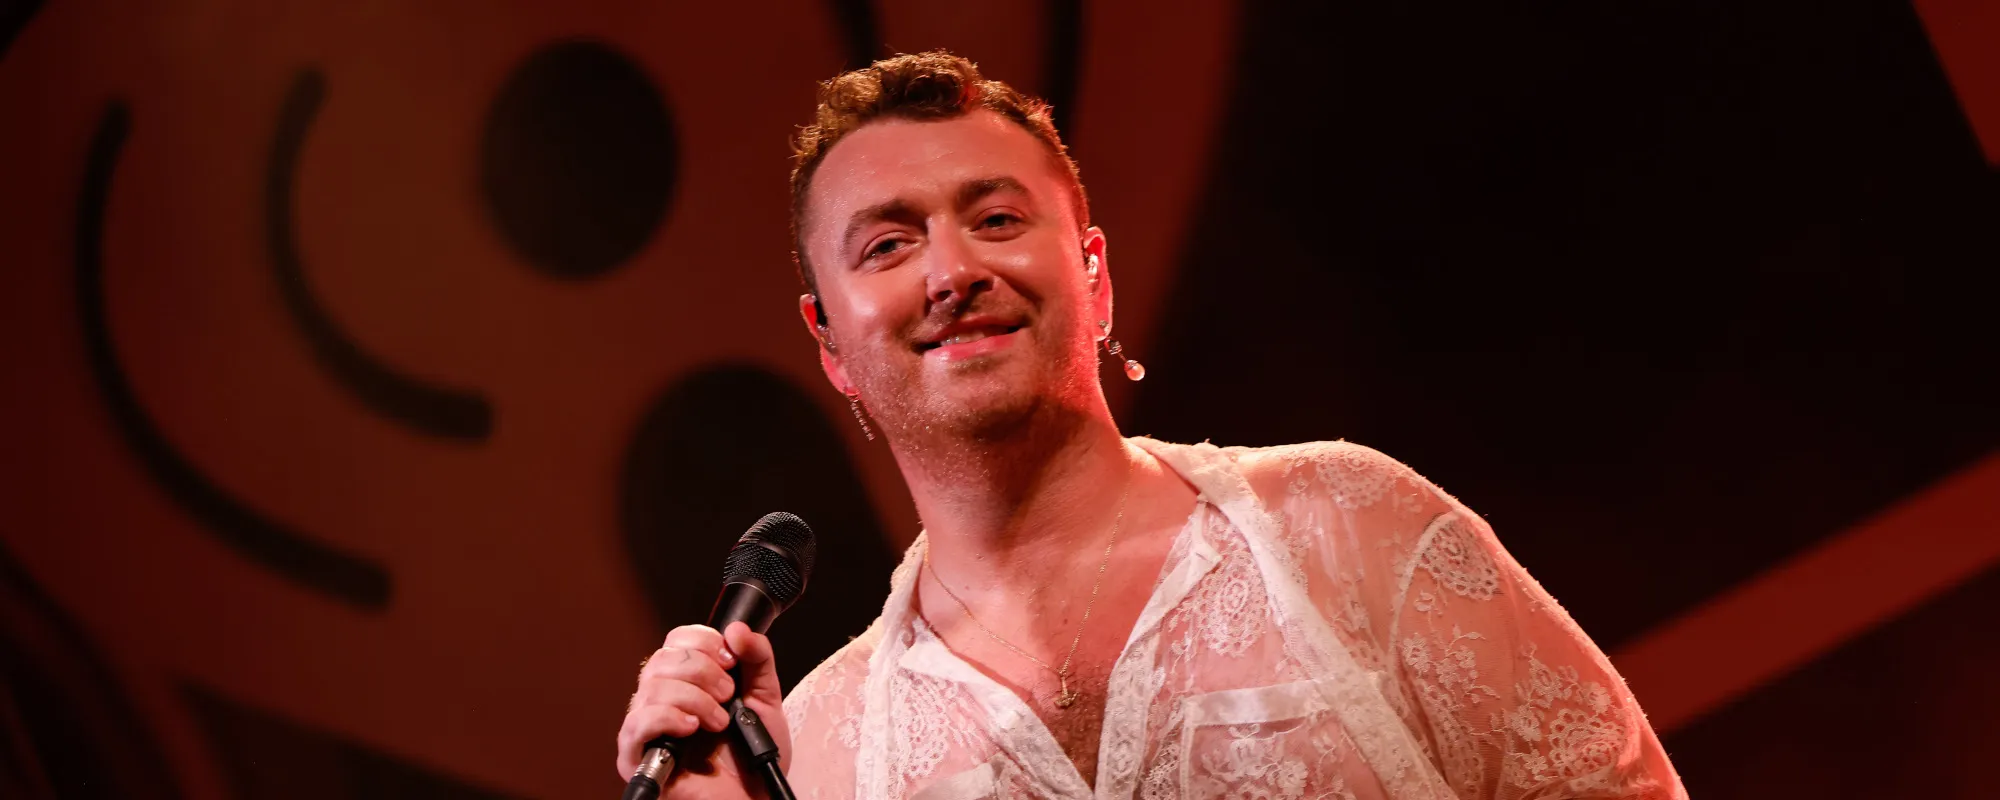 Top 10 Songs by Sam Smith